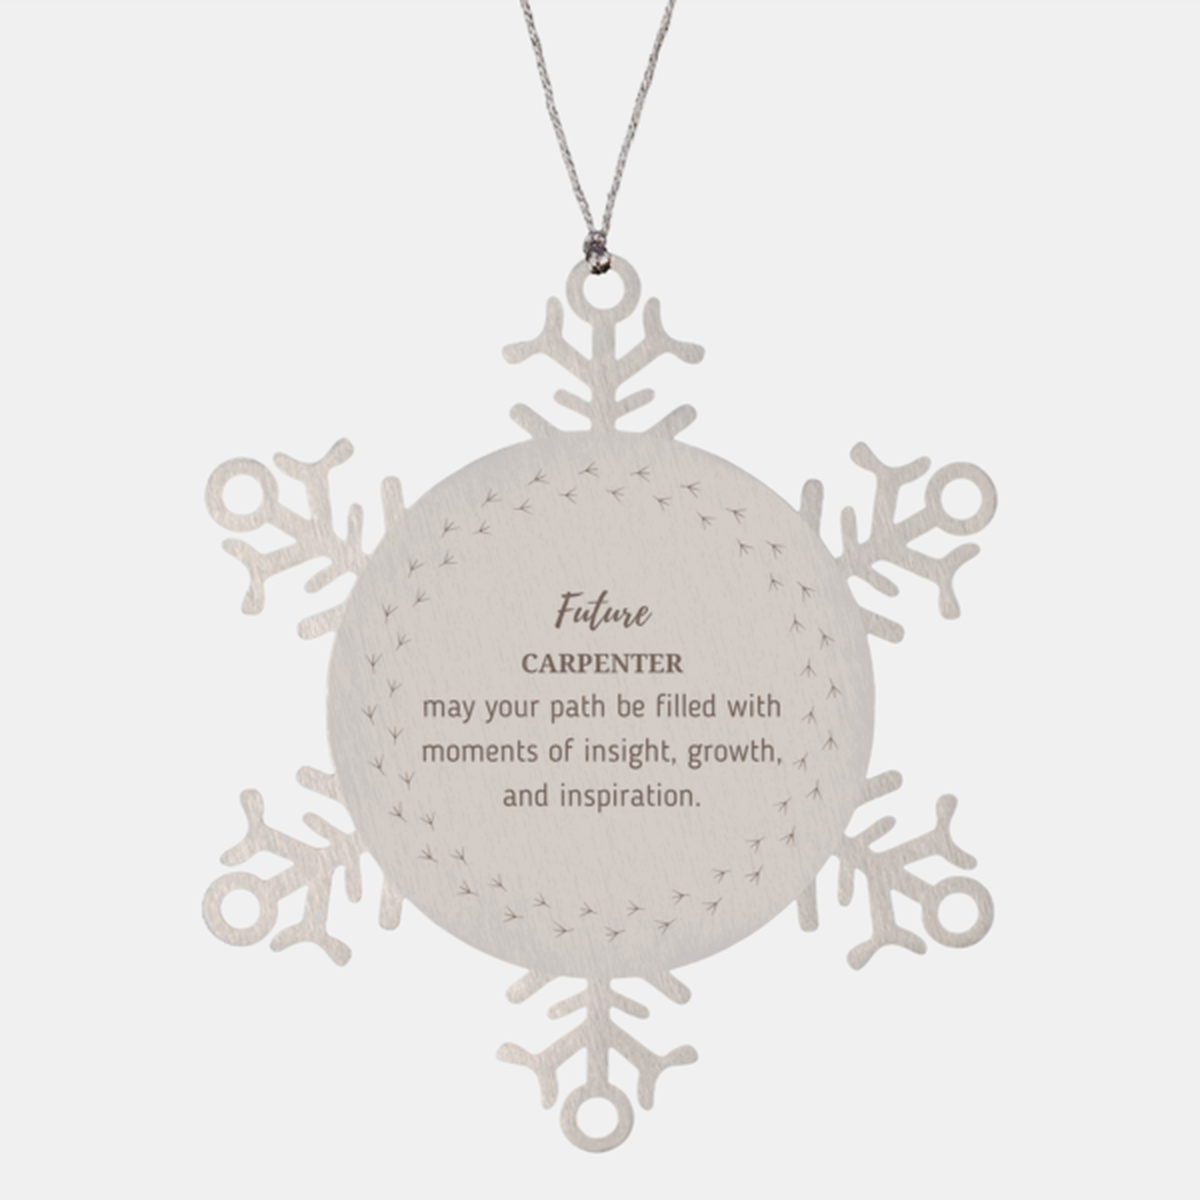 Future Carpenter Gifts, May your path be filled with moments of insight, Graduation Gifts for New Carpenter, Christmas Unique Snowflake Ornament For Men, Women, Friends